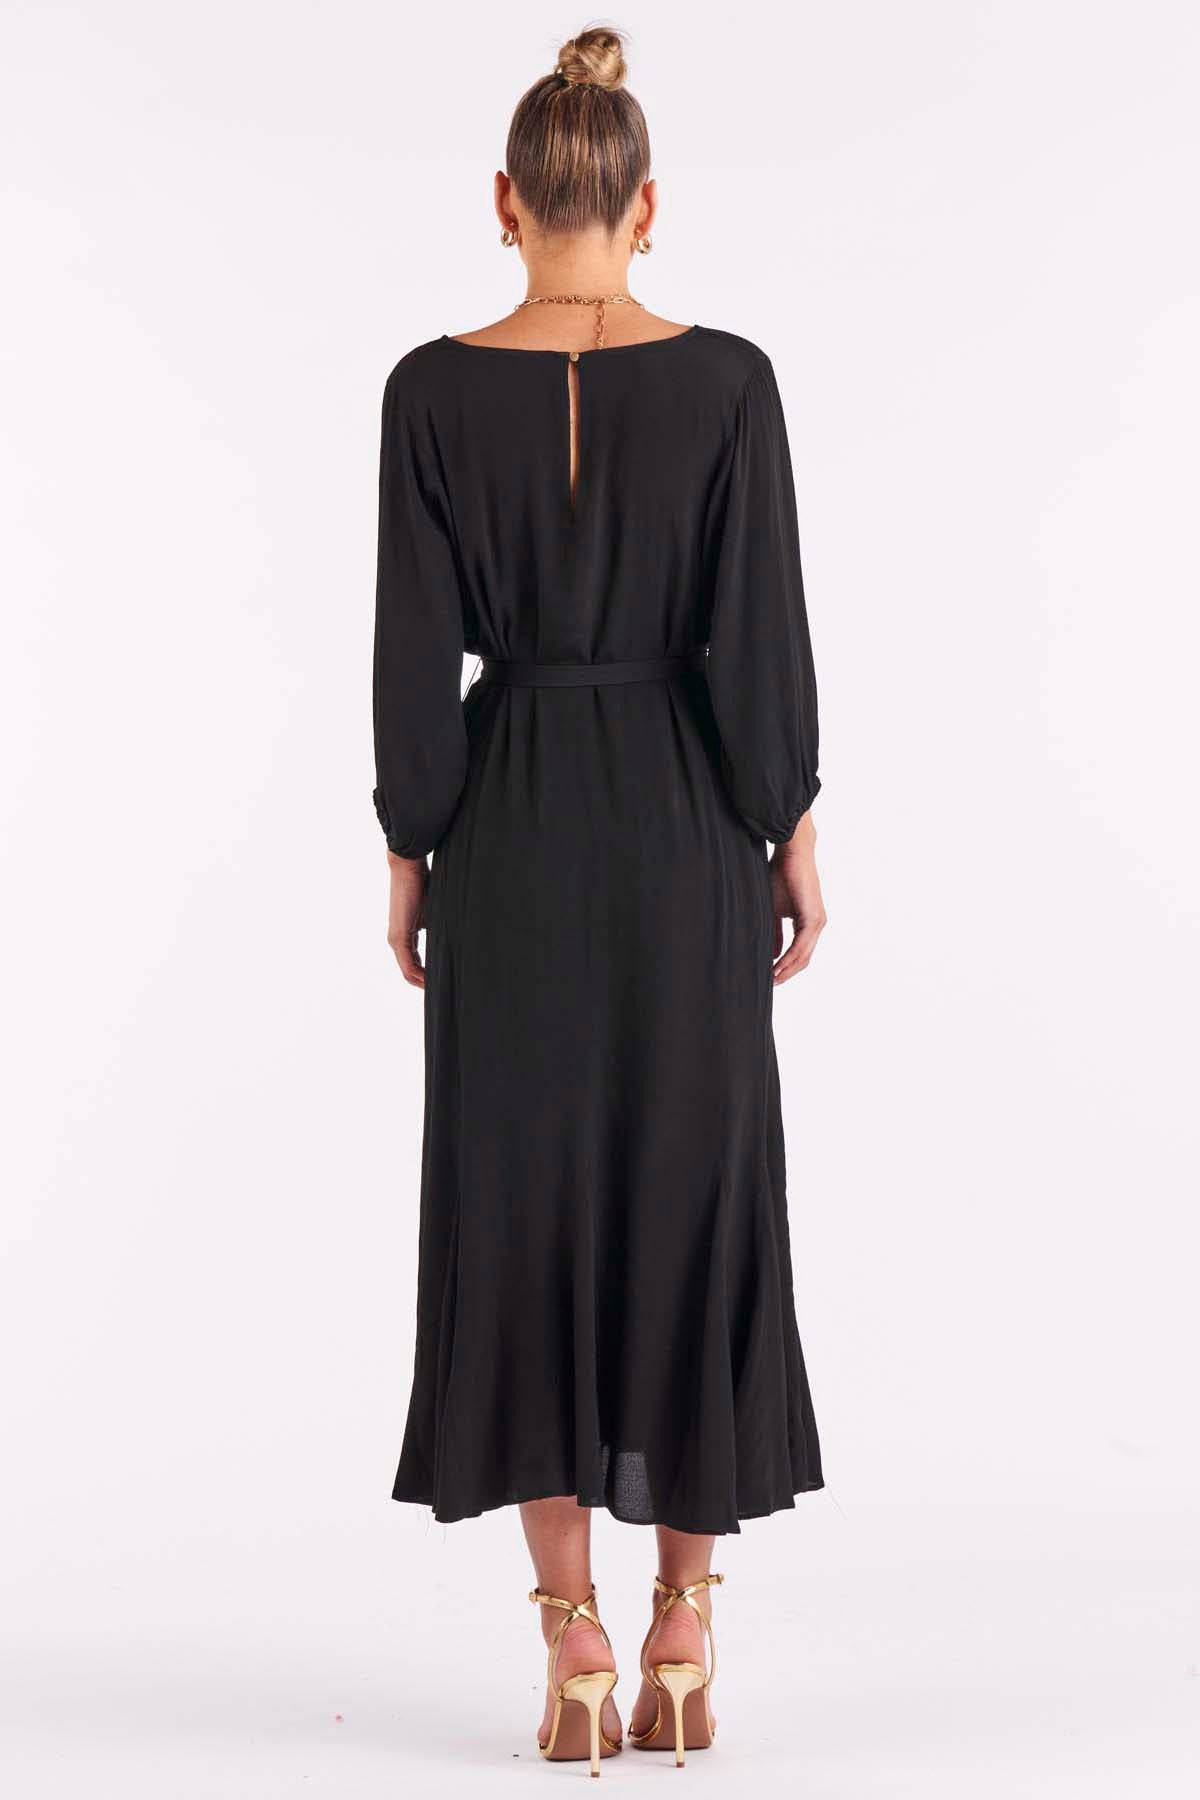 Fate + Becker Only Yesterday Dress in Black - Hey Sara